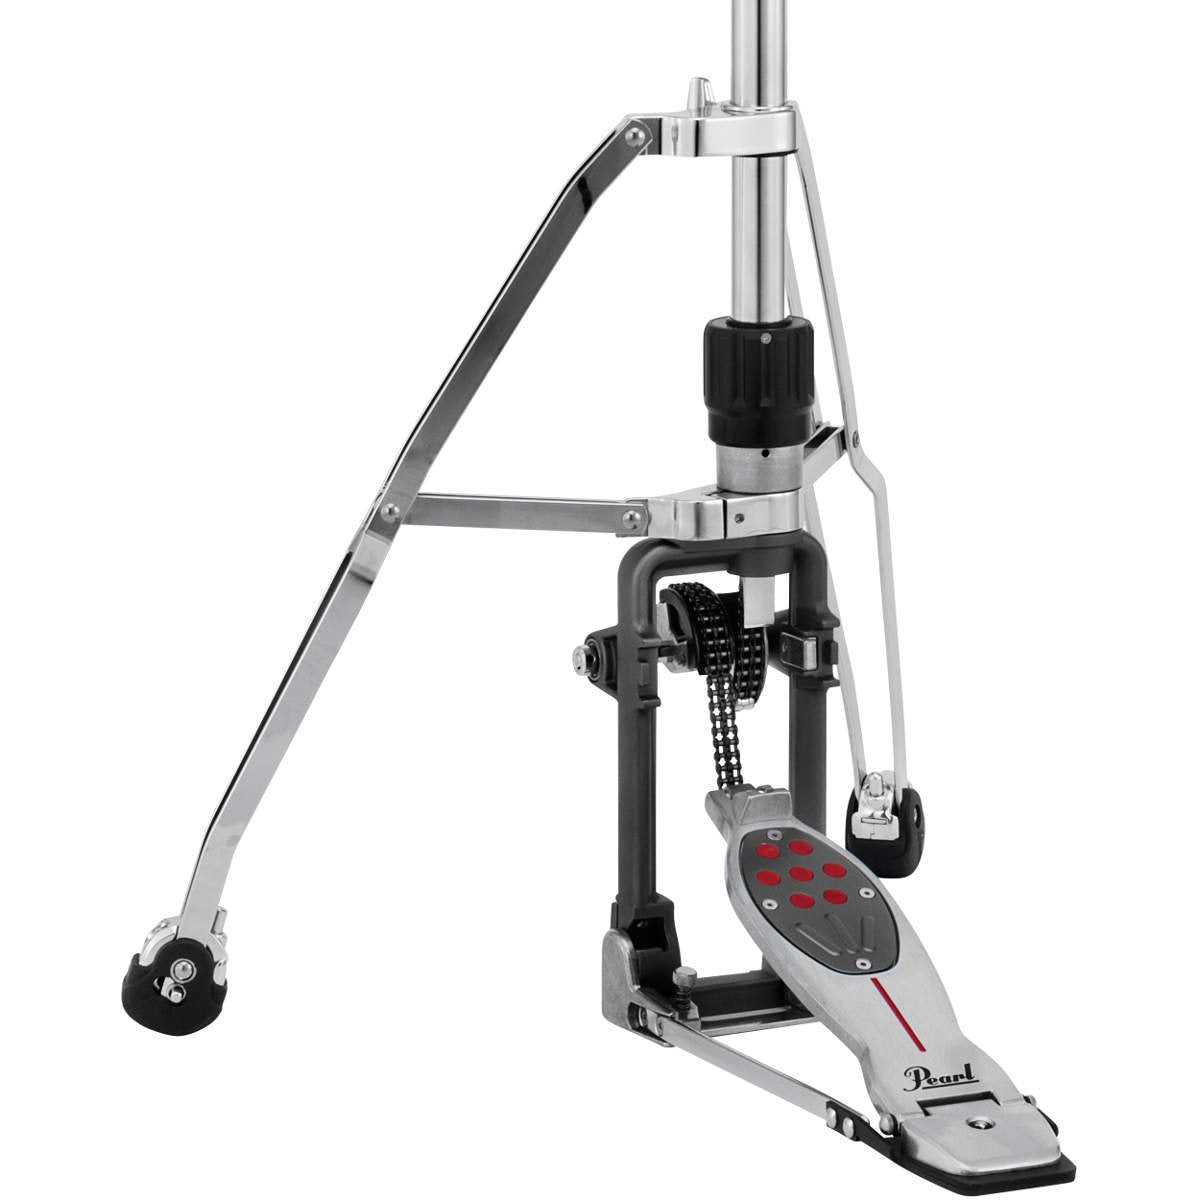 Pearl H2050 Eliminator Redline Premium Hi-hat Cymbal Stand with Swiveling  Legs Powershifter Interchangeable Cams Convertible Spike/Rubber Feet